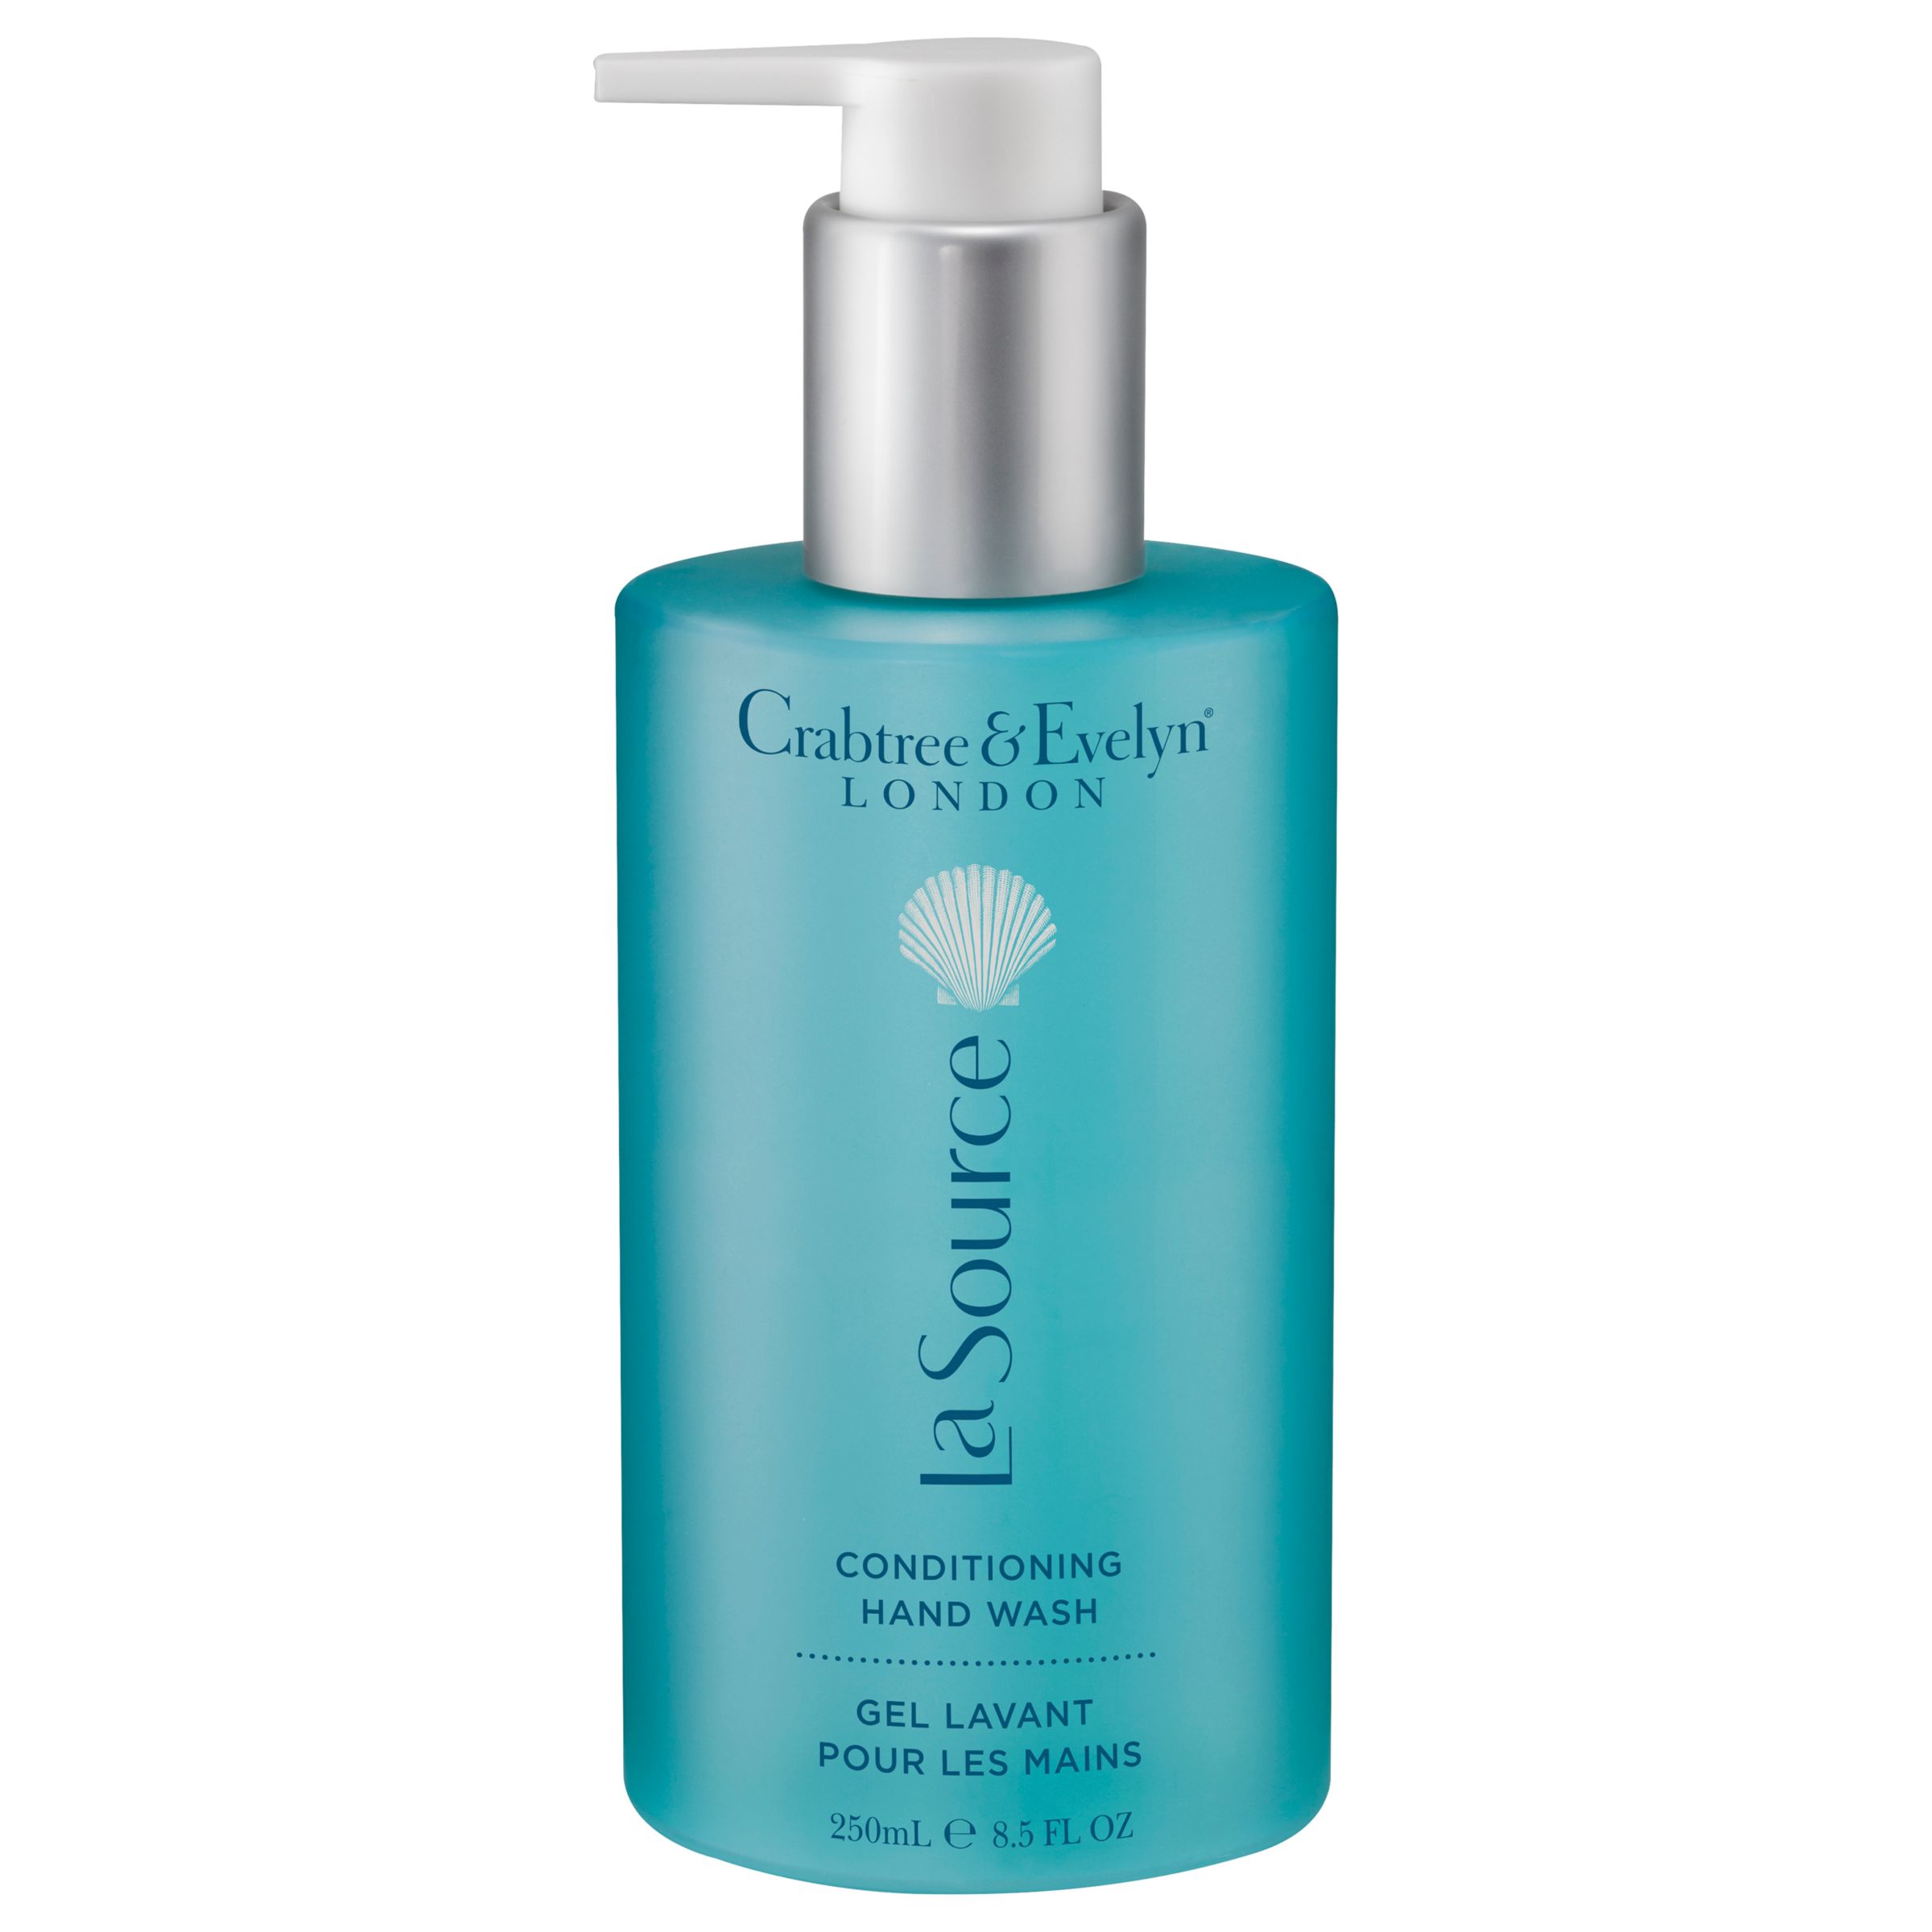 Crabtree & Evelyn La Source Conditioning Hand Wash, 250ml